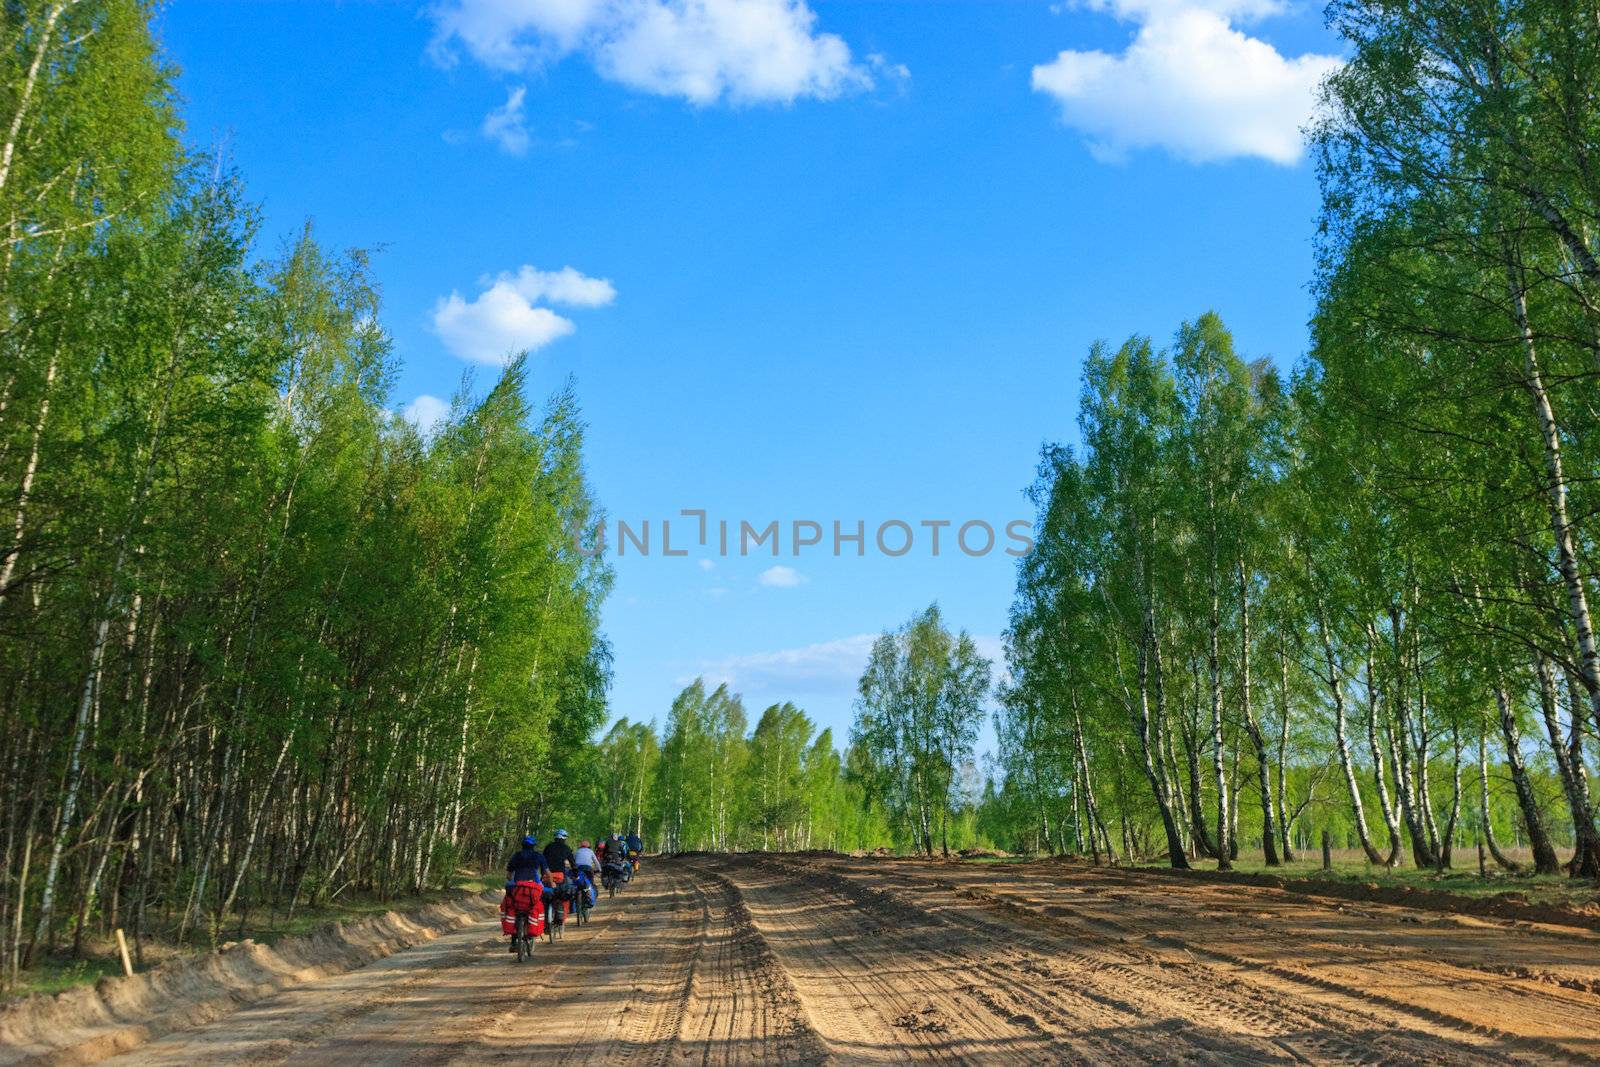 Group of Bicycle tourists on a dirt road